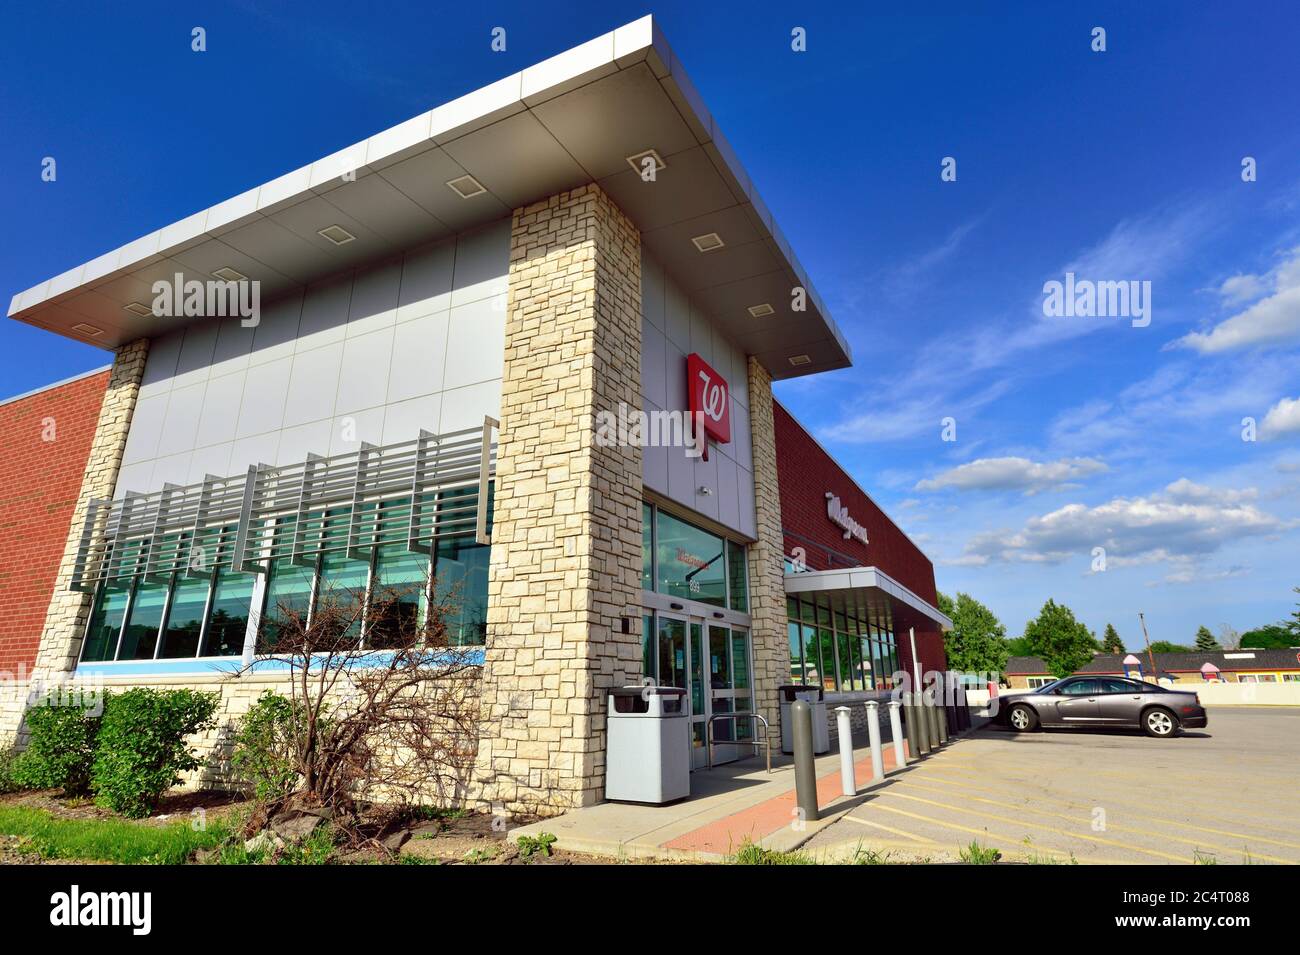 Bartlett, Illinois, USA. A Walgreens drug store in suburban Chicago. Walgreens maintains in excess of 9,000 store locations in the United States. Stock Photo